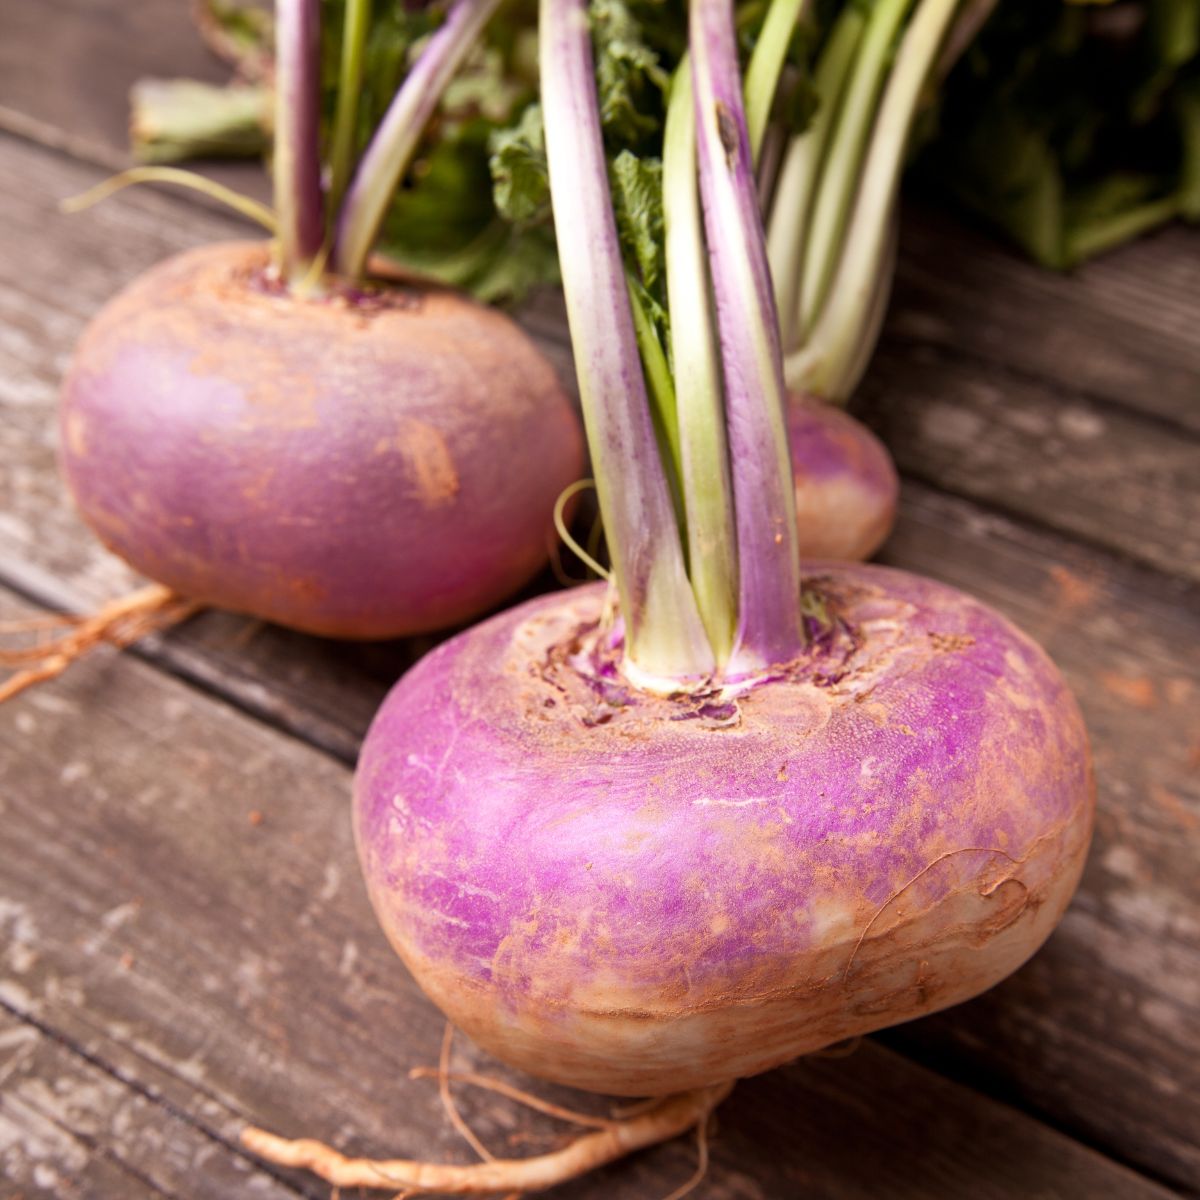 Two turnips on a wooden table.